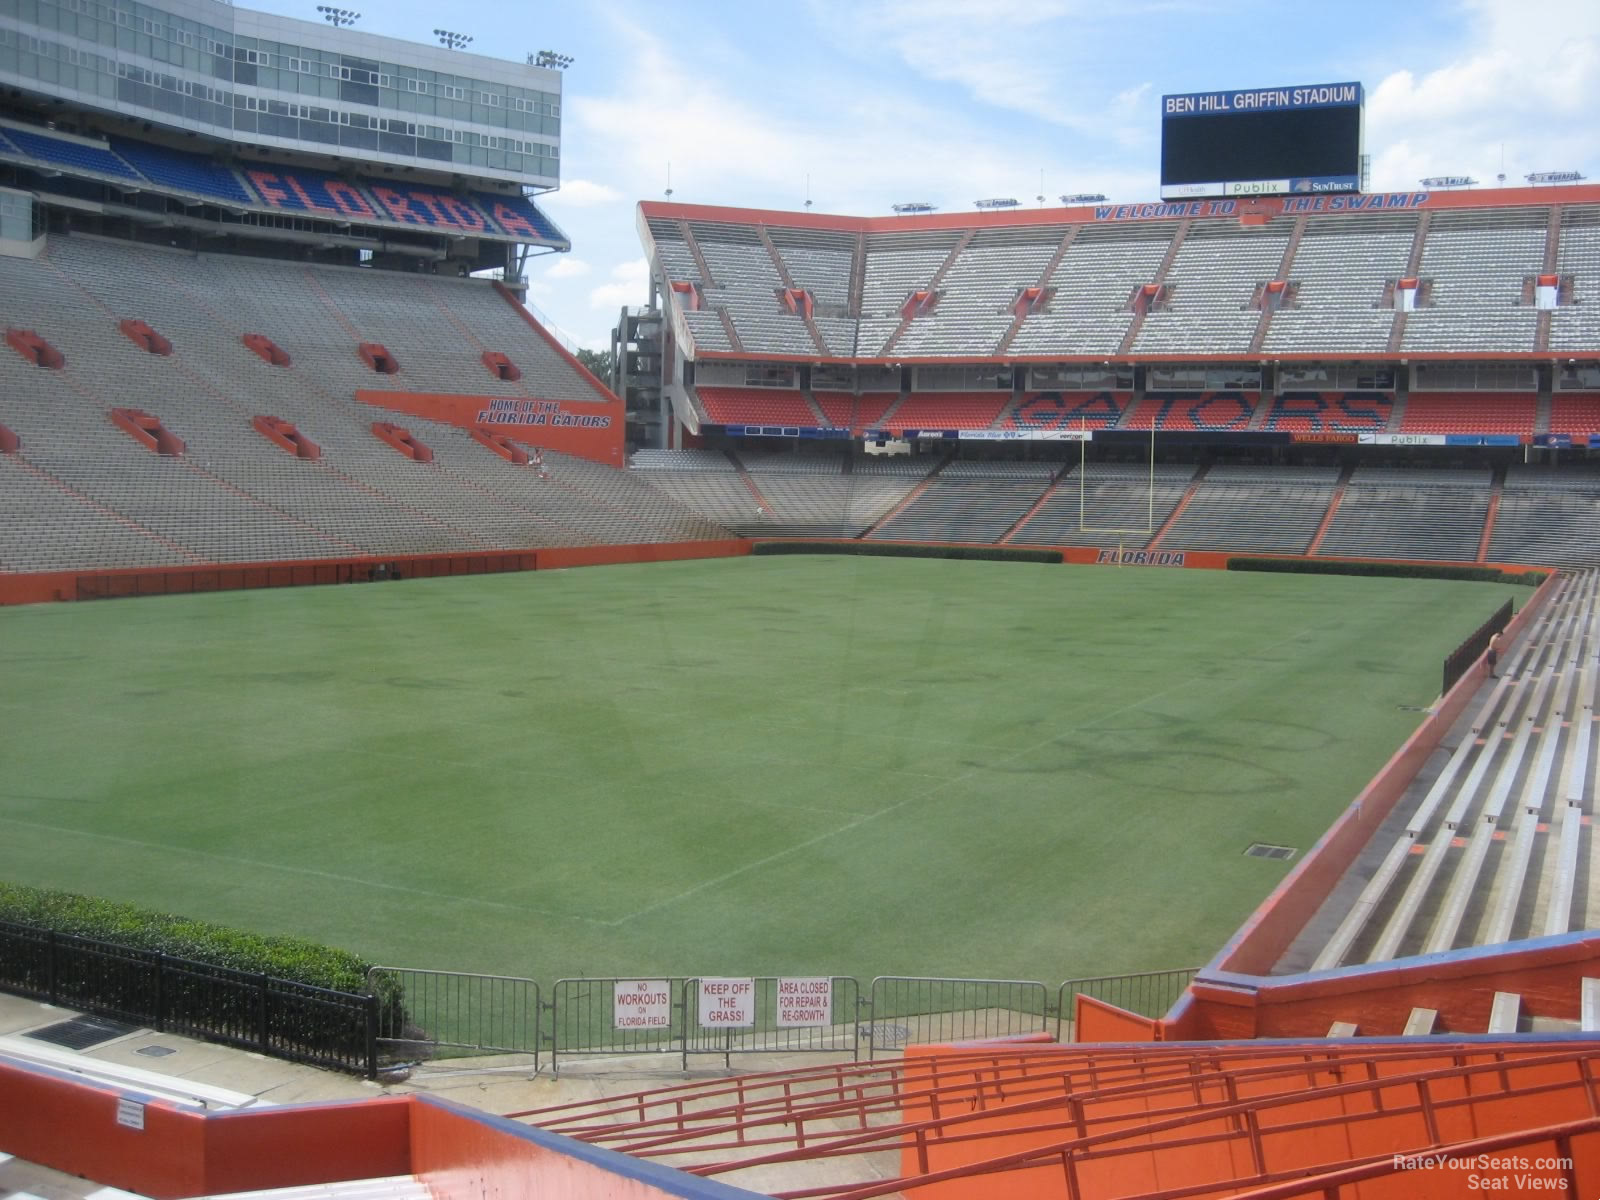 section b, row 23 seat view  - ben hill griffin stadium